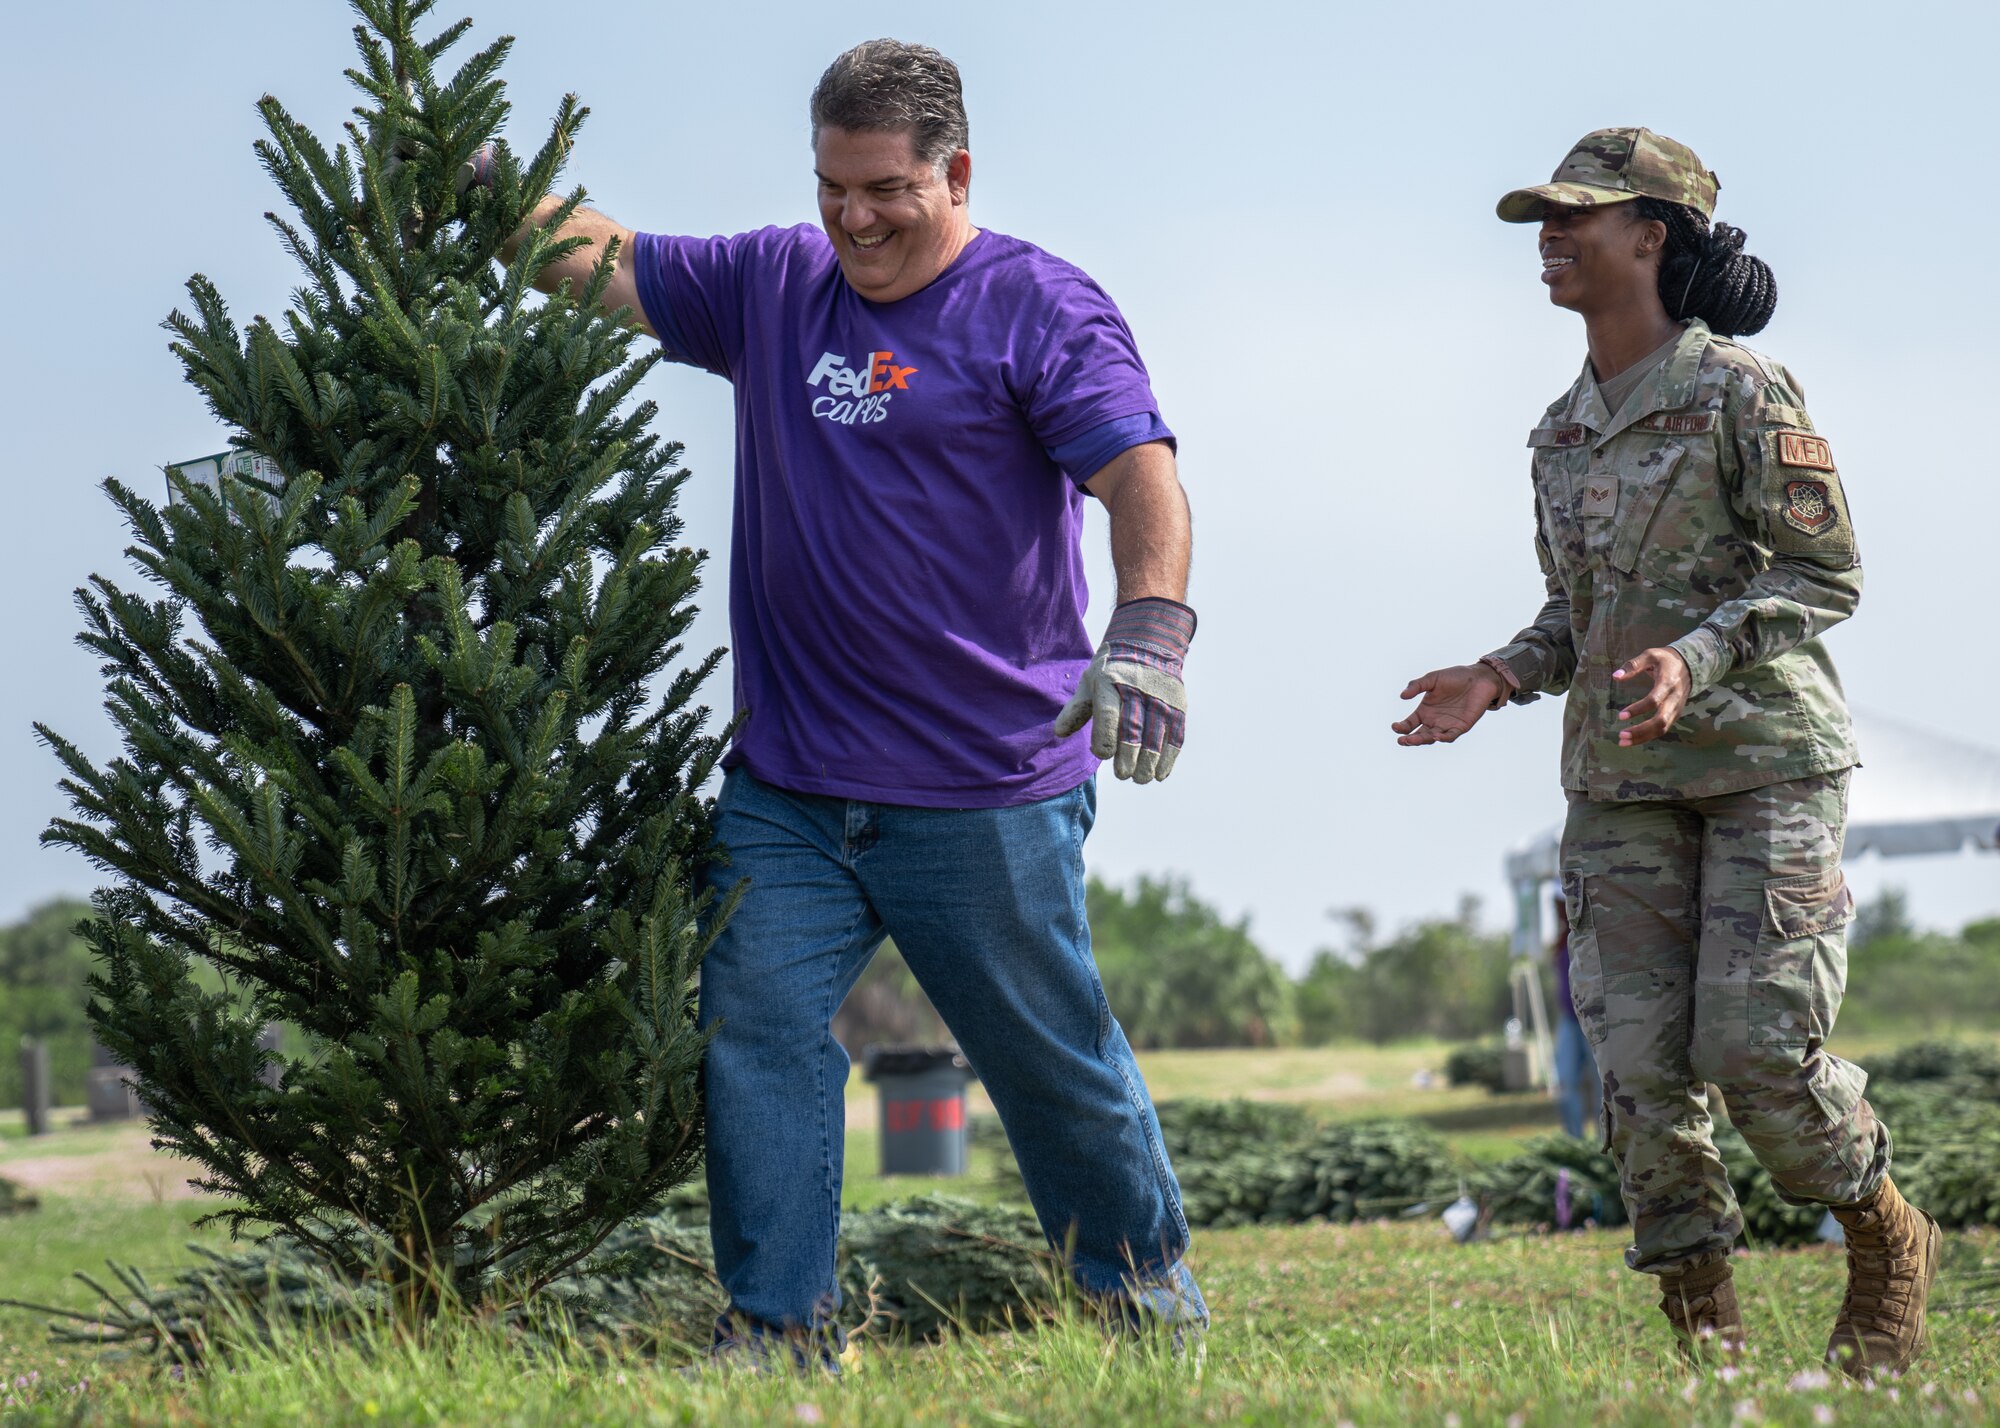 U.S. Air Force Senior Airman Briah Byrd, 6th Aerospace Medicine Squadron aerospace medical service technician, picks up a Christmas tree during the Trees for Troops event at MacDill Air Force Base, Florida, Dec. 9, 2021.